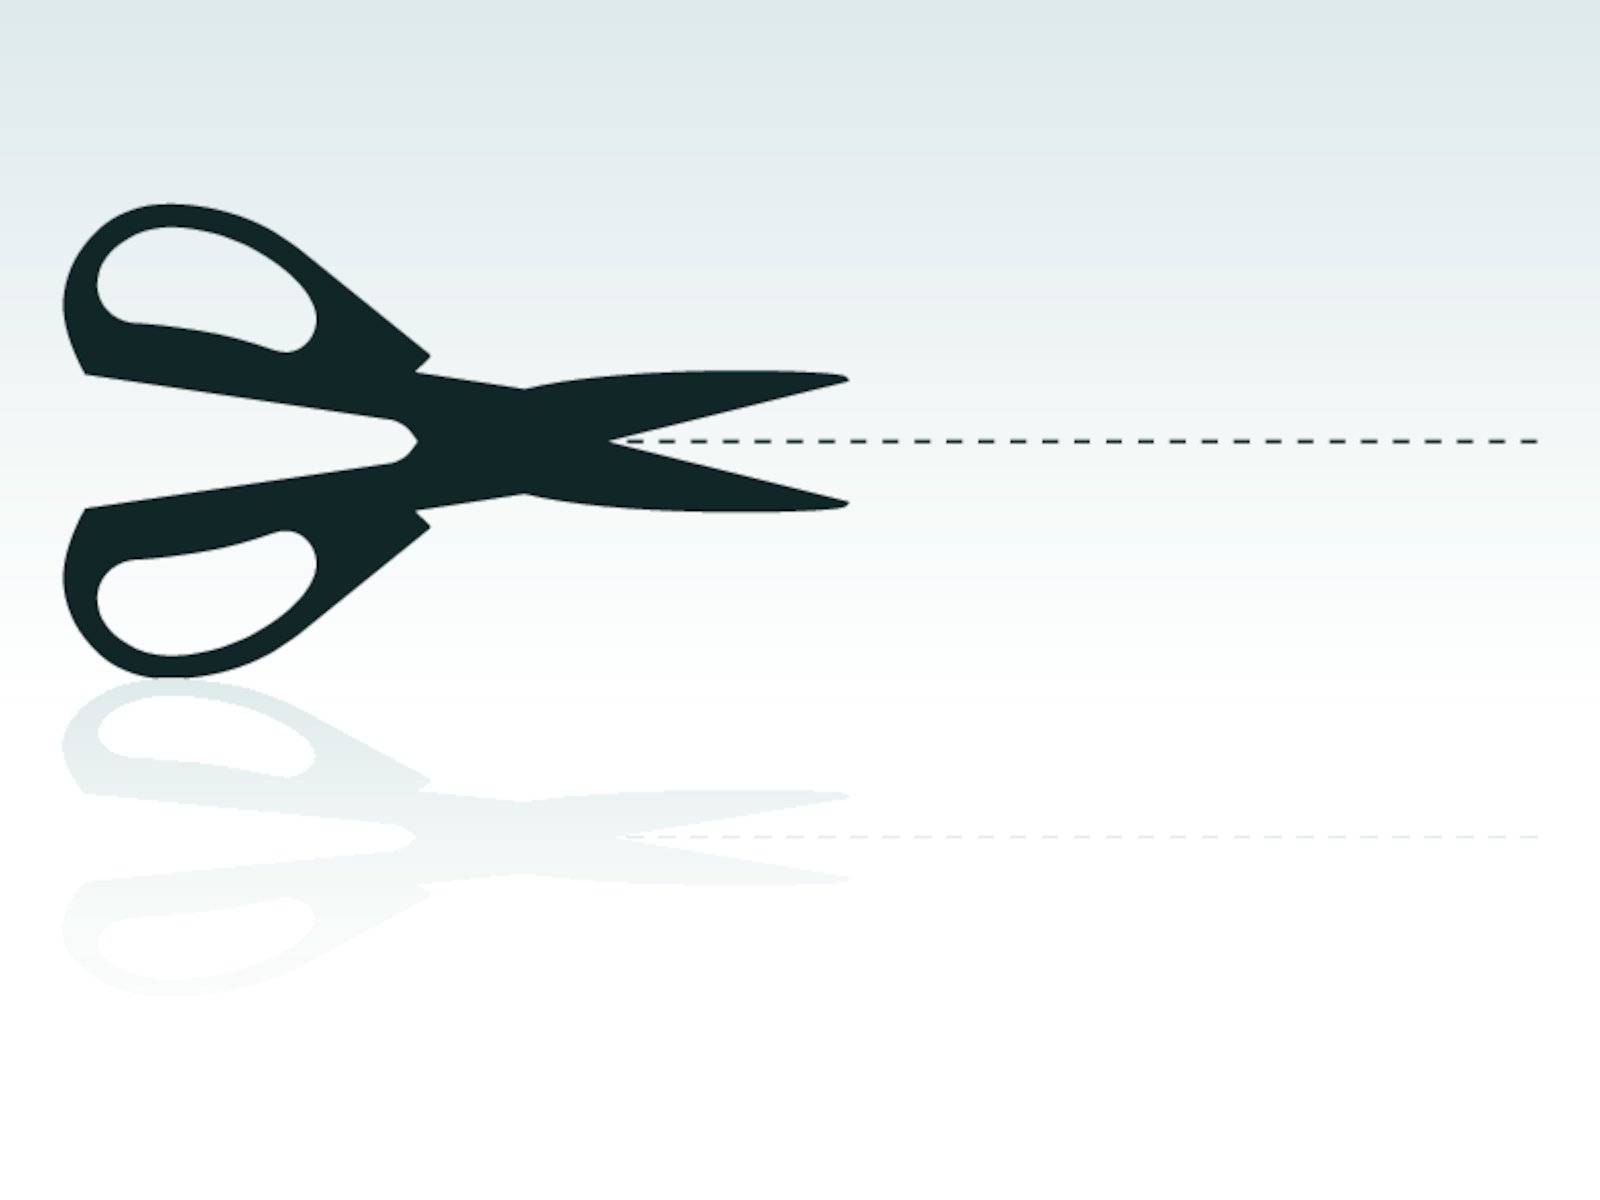 Silhouette Illustration of Scissors and Cutting Mark (jpeg file also has clipping path)